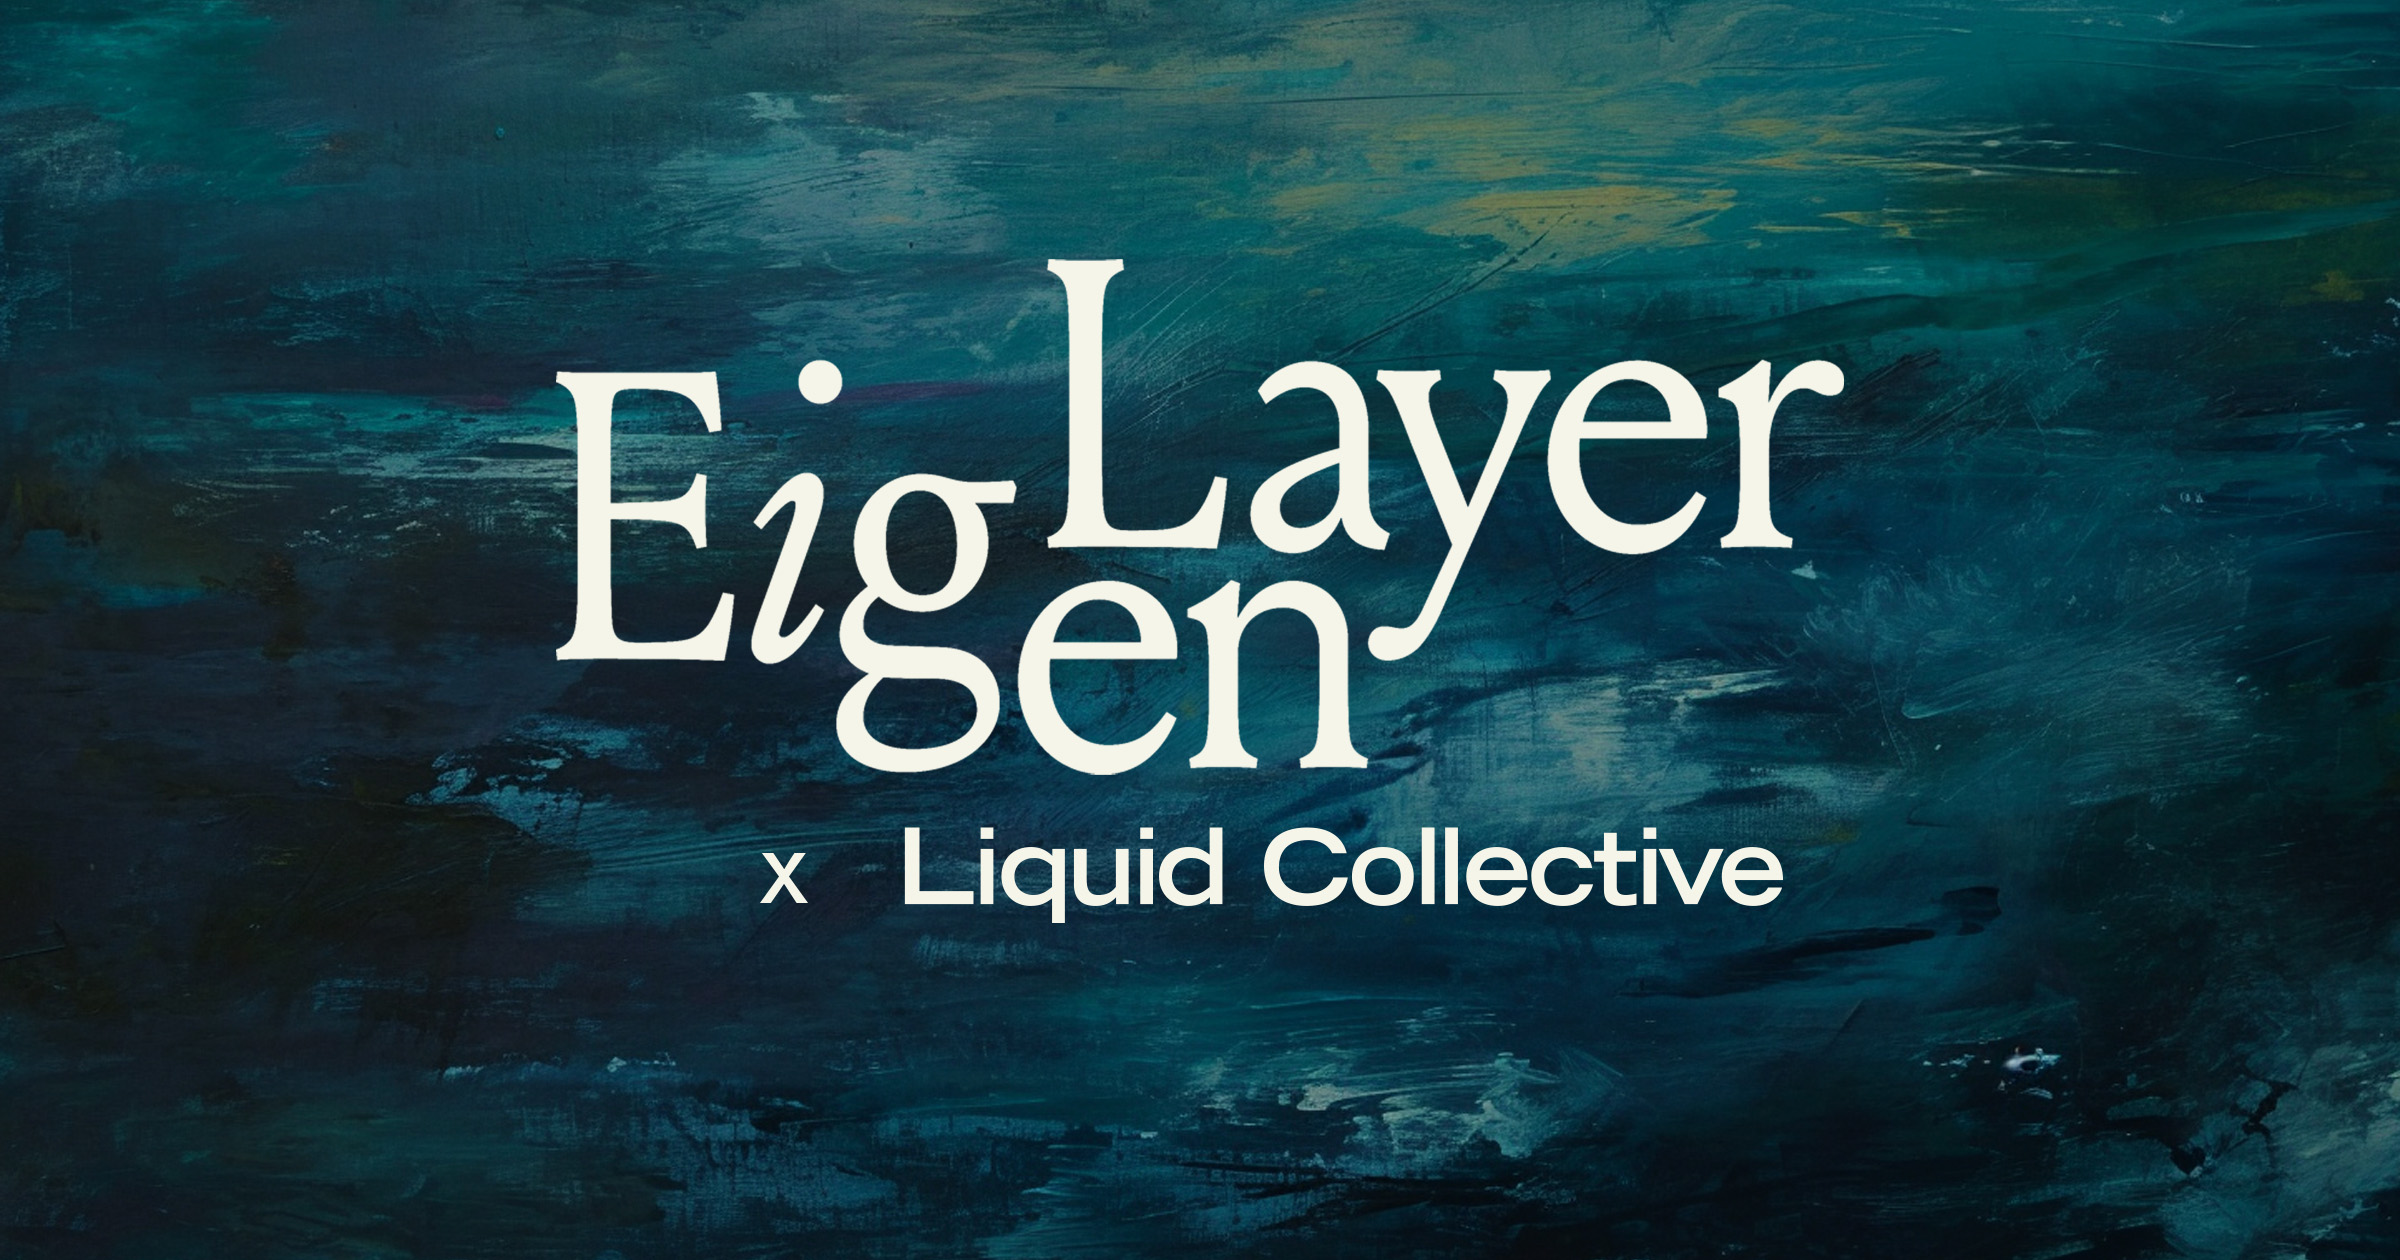 EigenLayer and restaking: Restaking Liquid Staked ETH (LsETH)